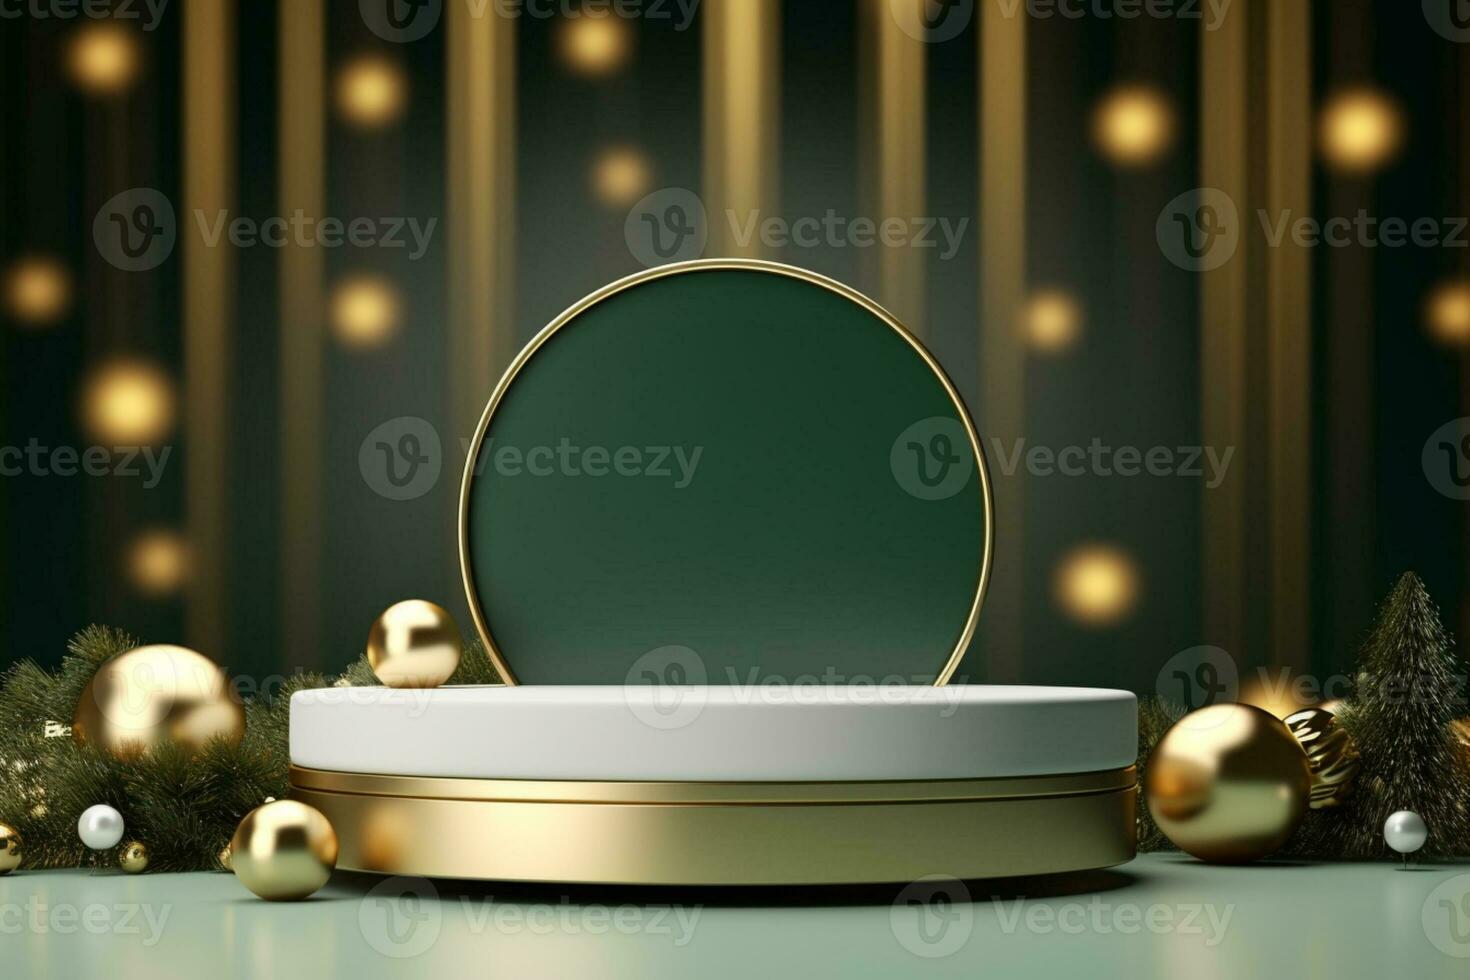 AI generated merry Christmas 3d rendered red Podium display for event photo